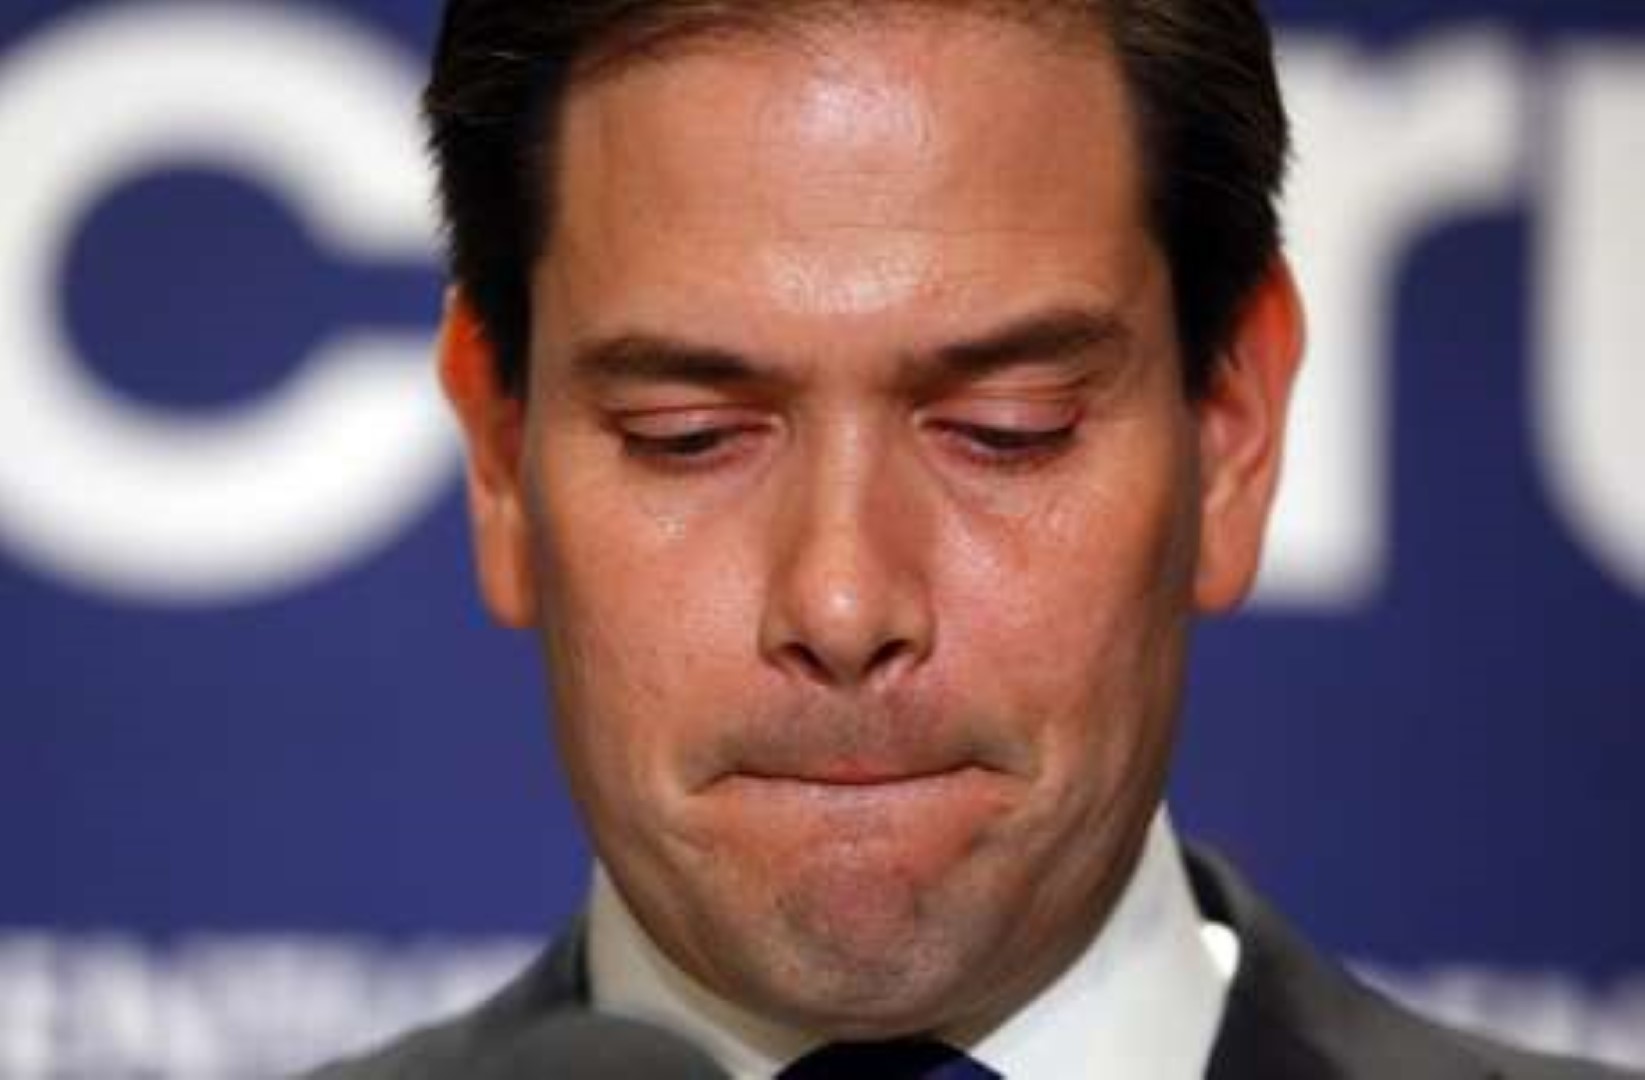 Senate Majority Pac Afscme People Launch Ad Campaign Hitting Marco Rubio Over Social Security